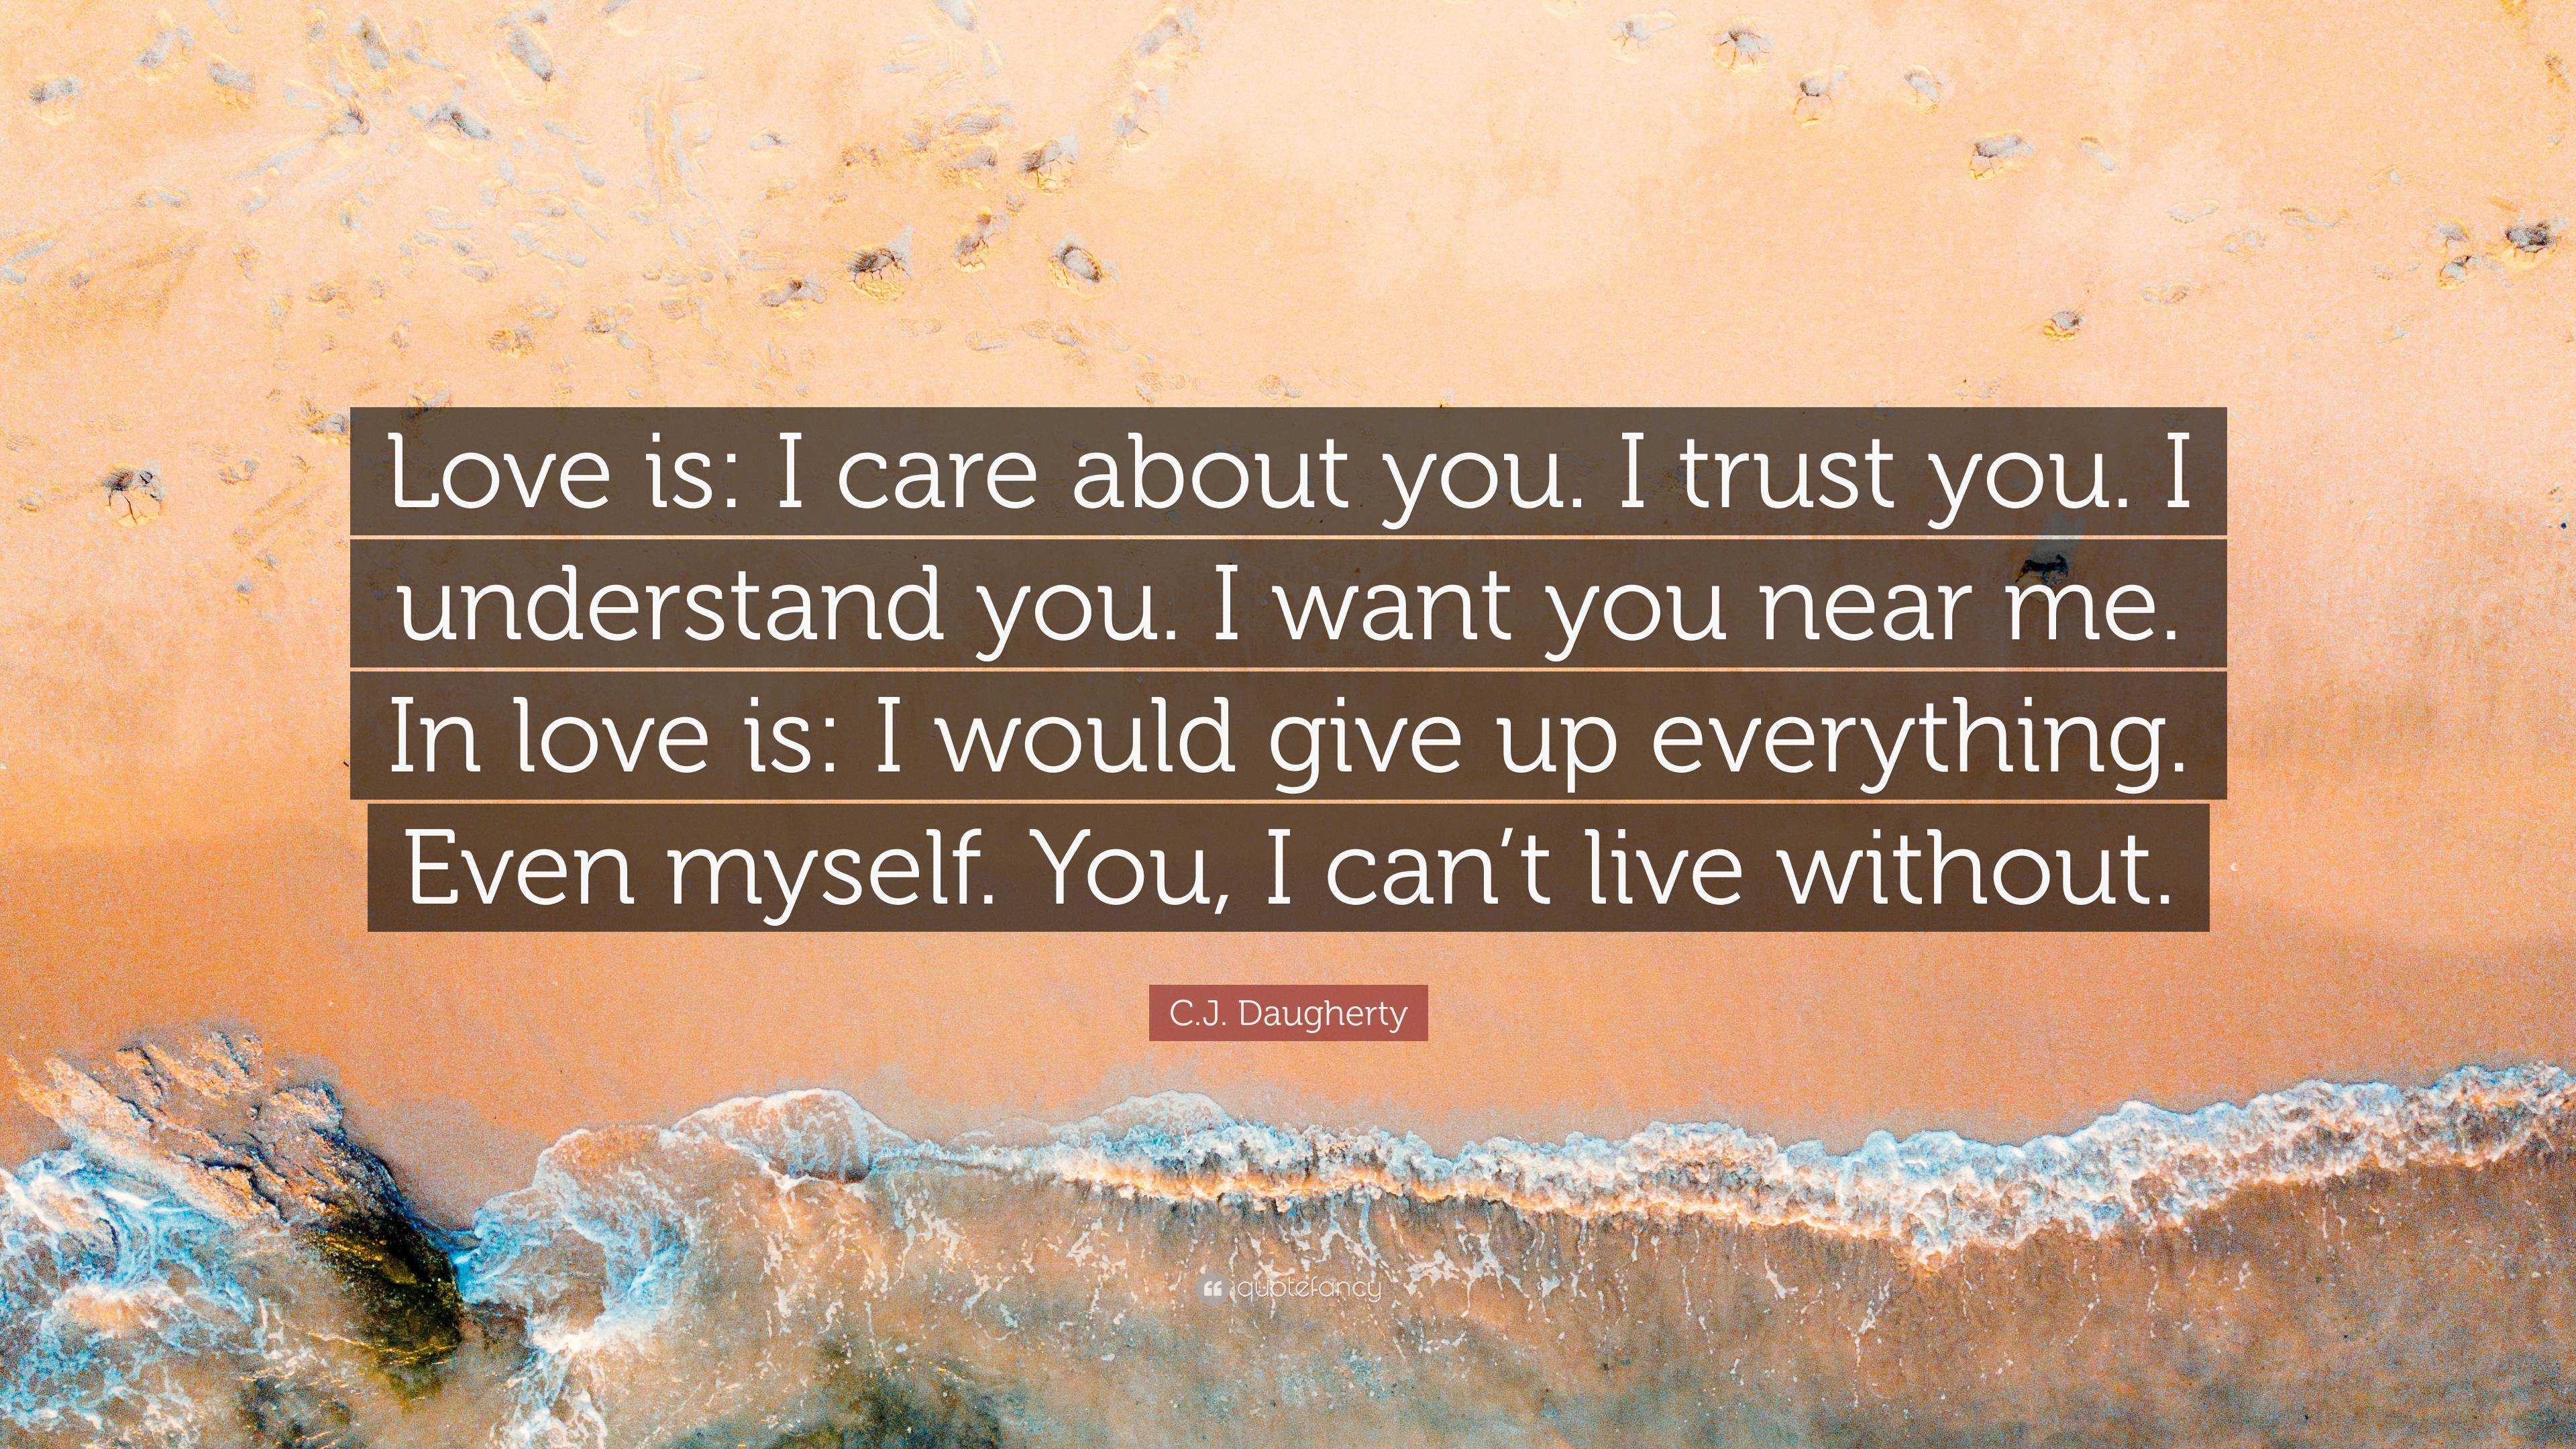 https://quotefancy.com/media/wallpaper/3840x2160/6765599-C-J-Daugherty-Quote-Love-is-I-care-about-you-I-trust-you-I.jpg